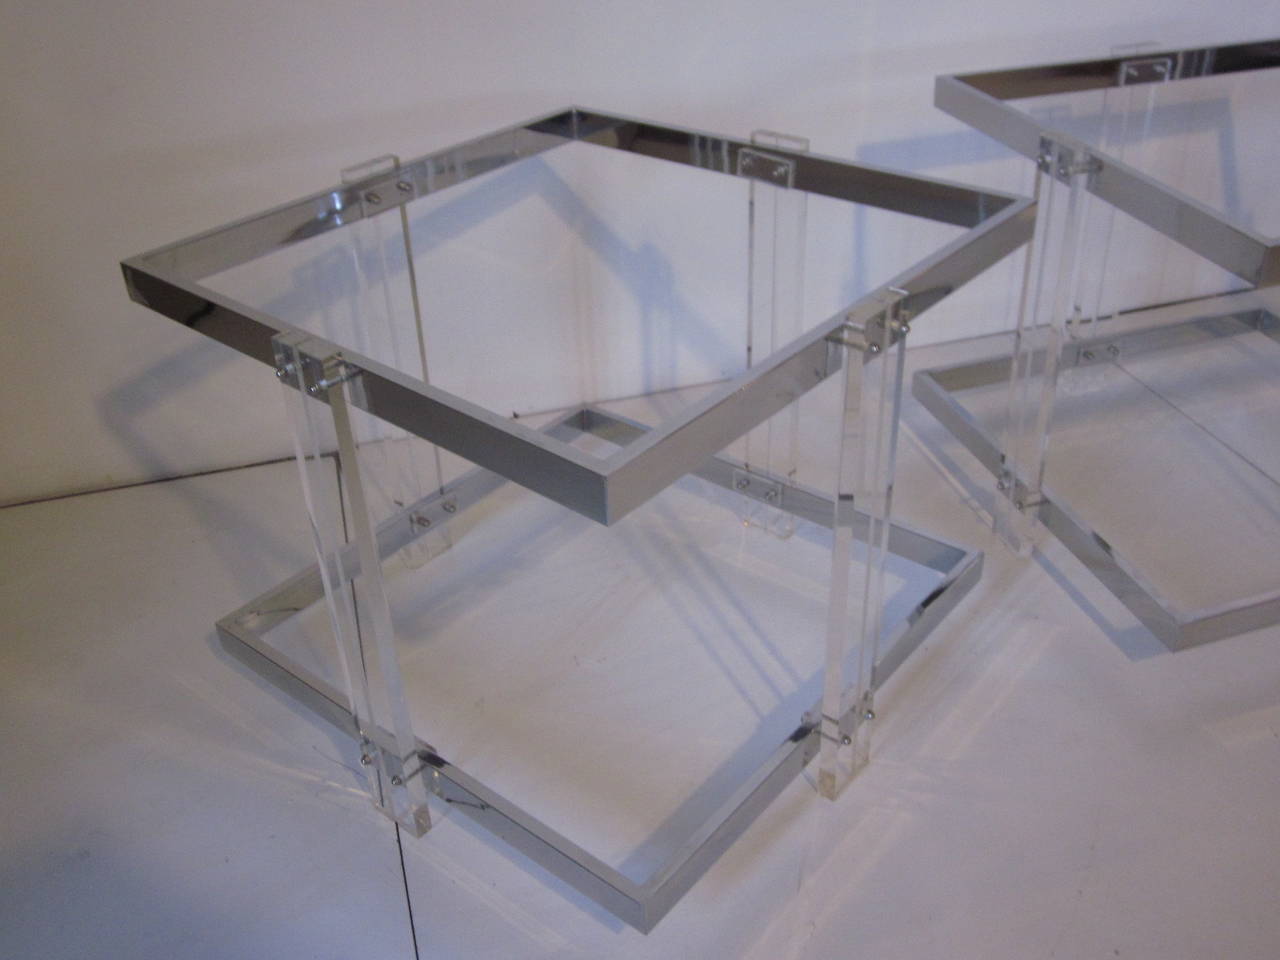 A pair of chrome and Lucite end tables with two plate glass shelves, Lucite legs with grooved detail and banded construction.